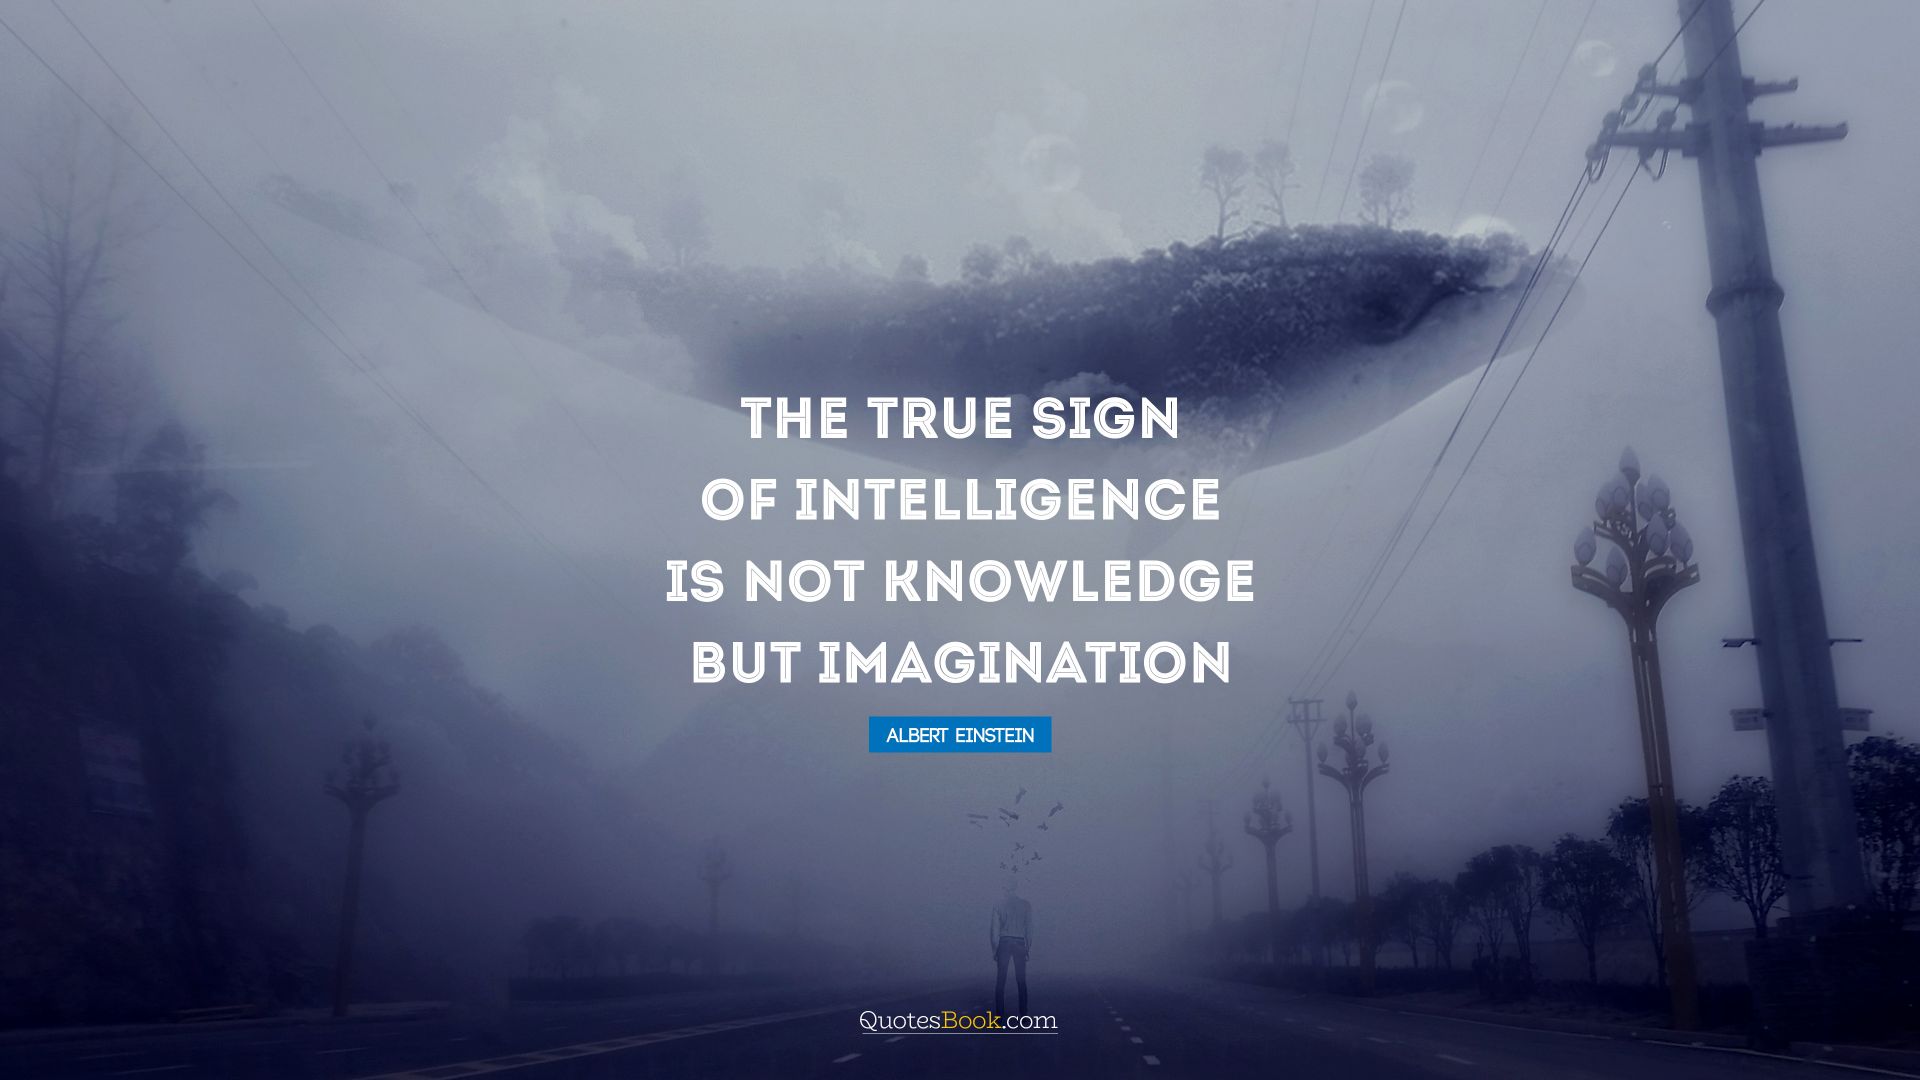 The true sign of intelligence is not knowledge but imagination. - Quote by Albert Einstein